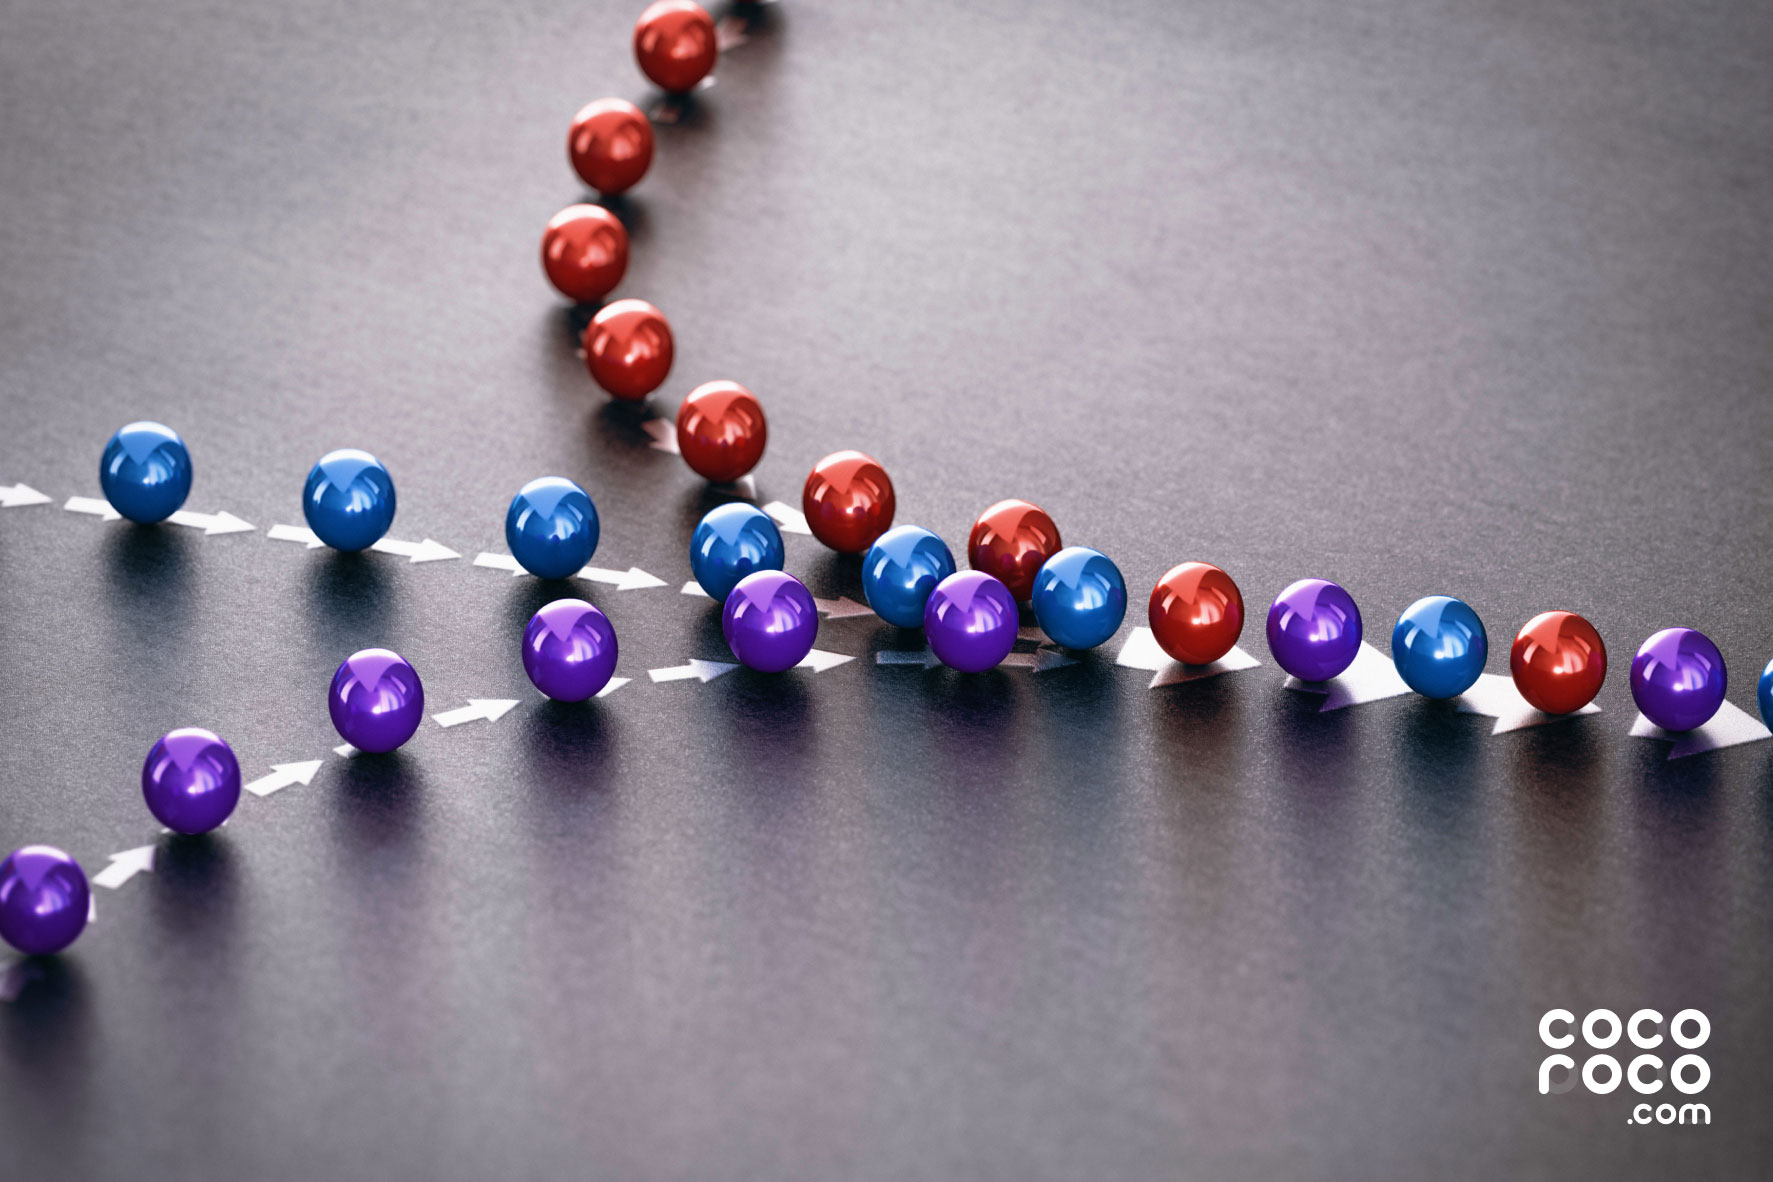 Sets of blue, purple, and red beads following separate paths that lead to one